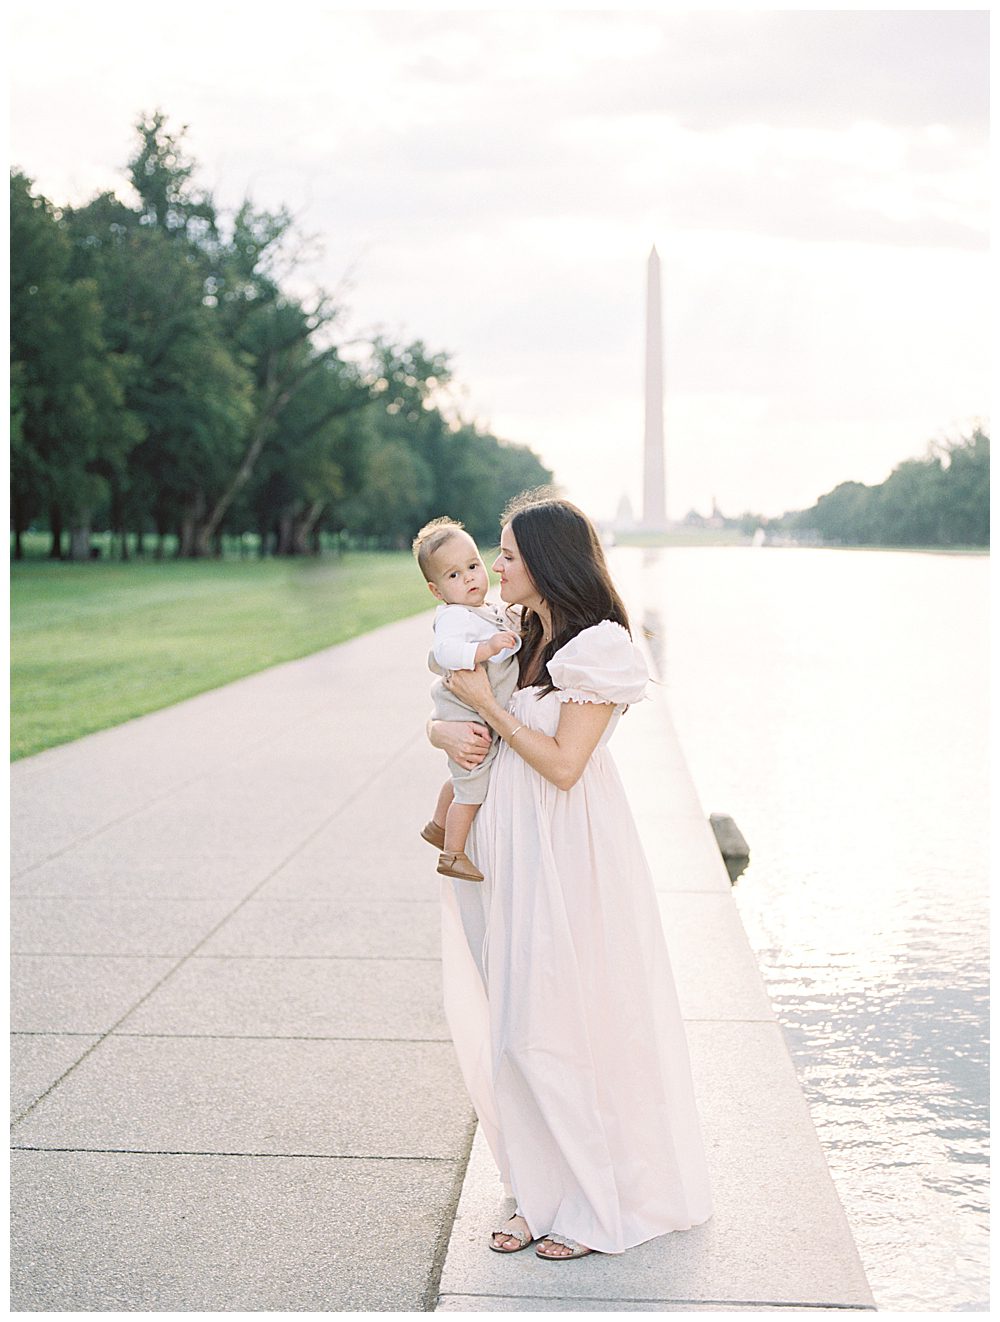 Mother leans into son while standing at reflecting pool during DC Monuments Family Photo Session.